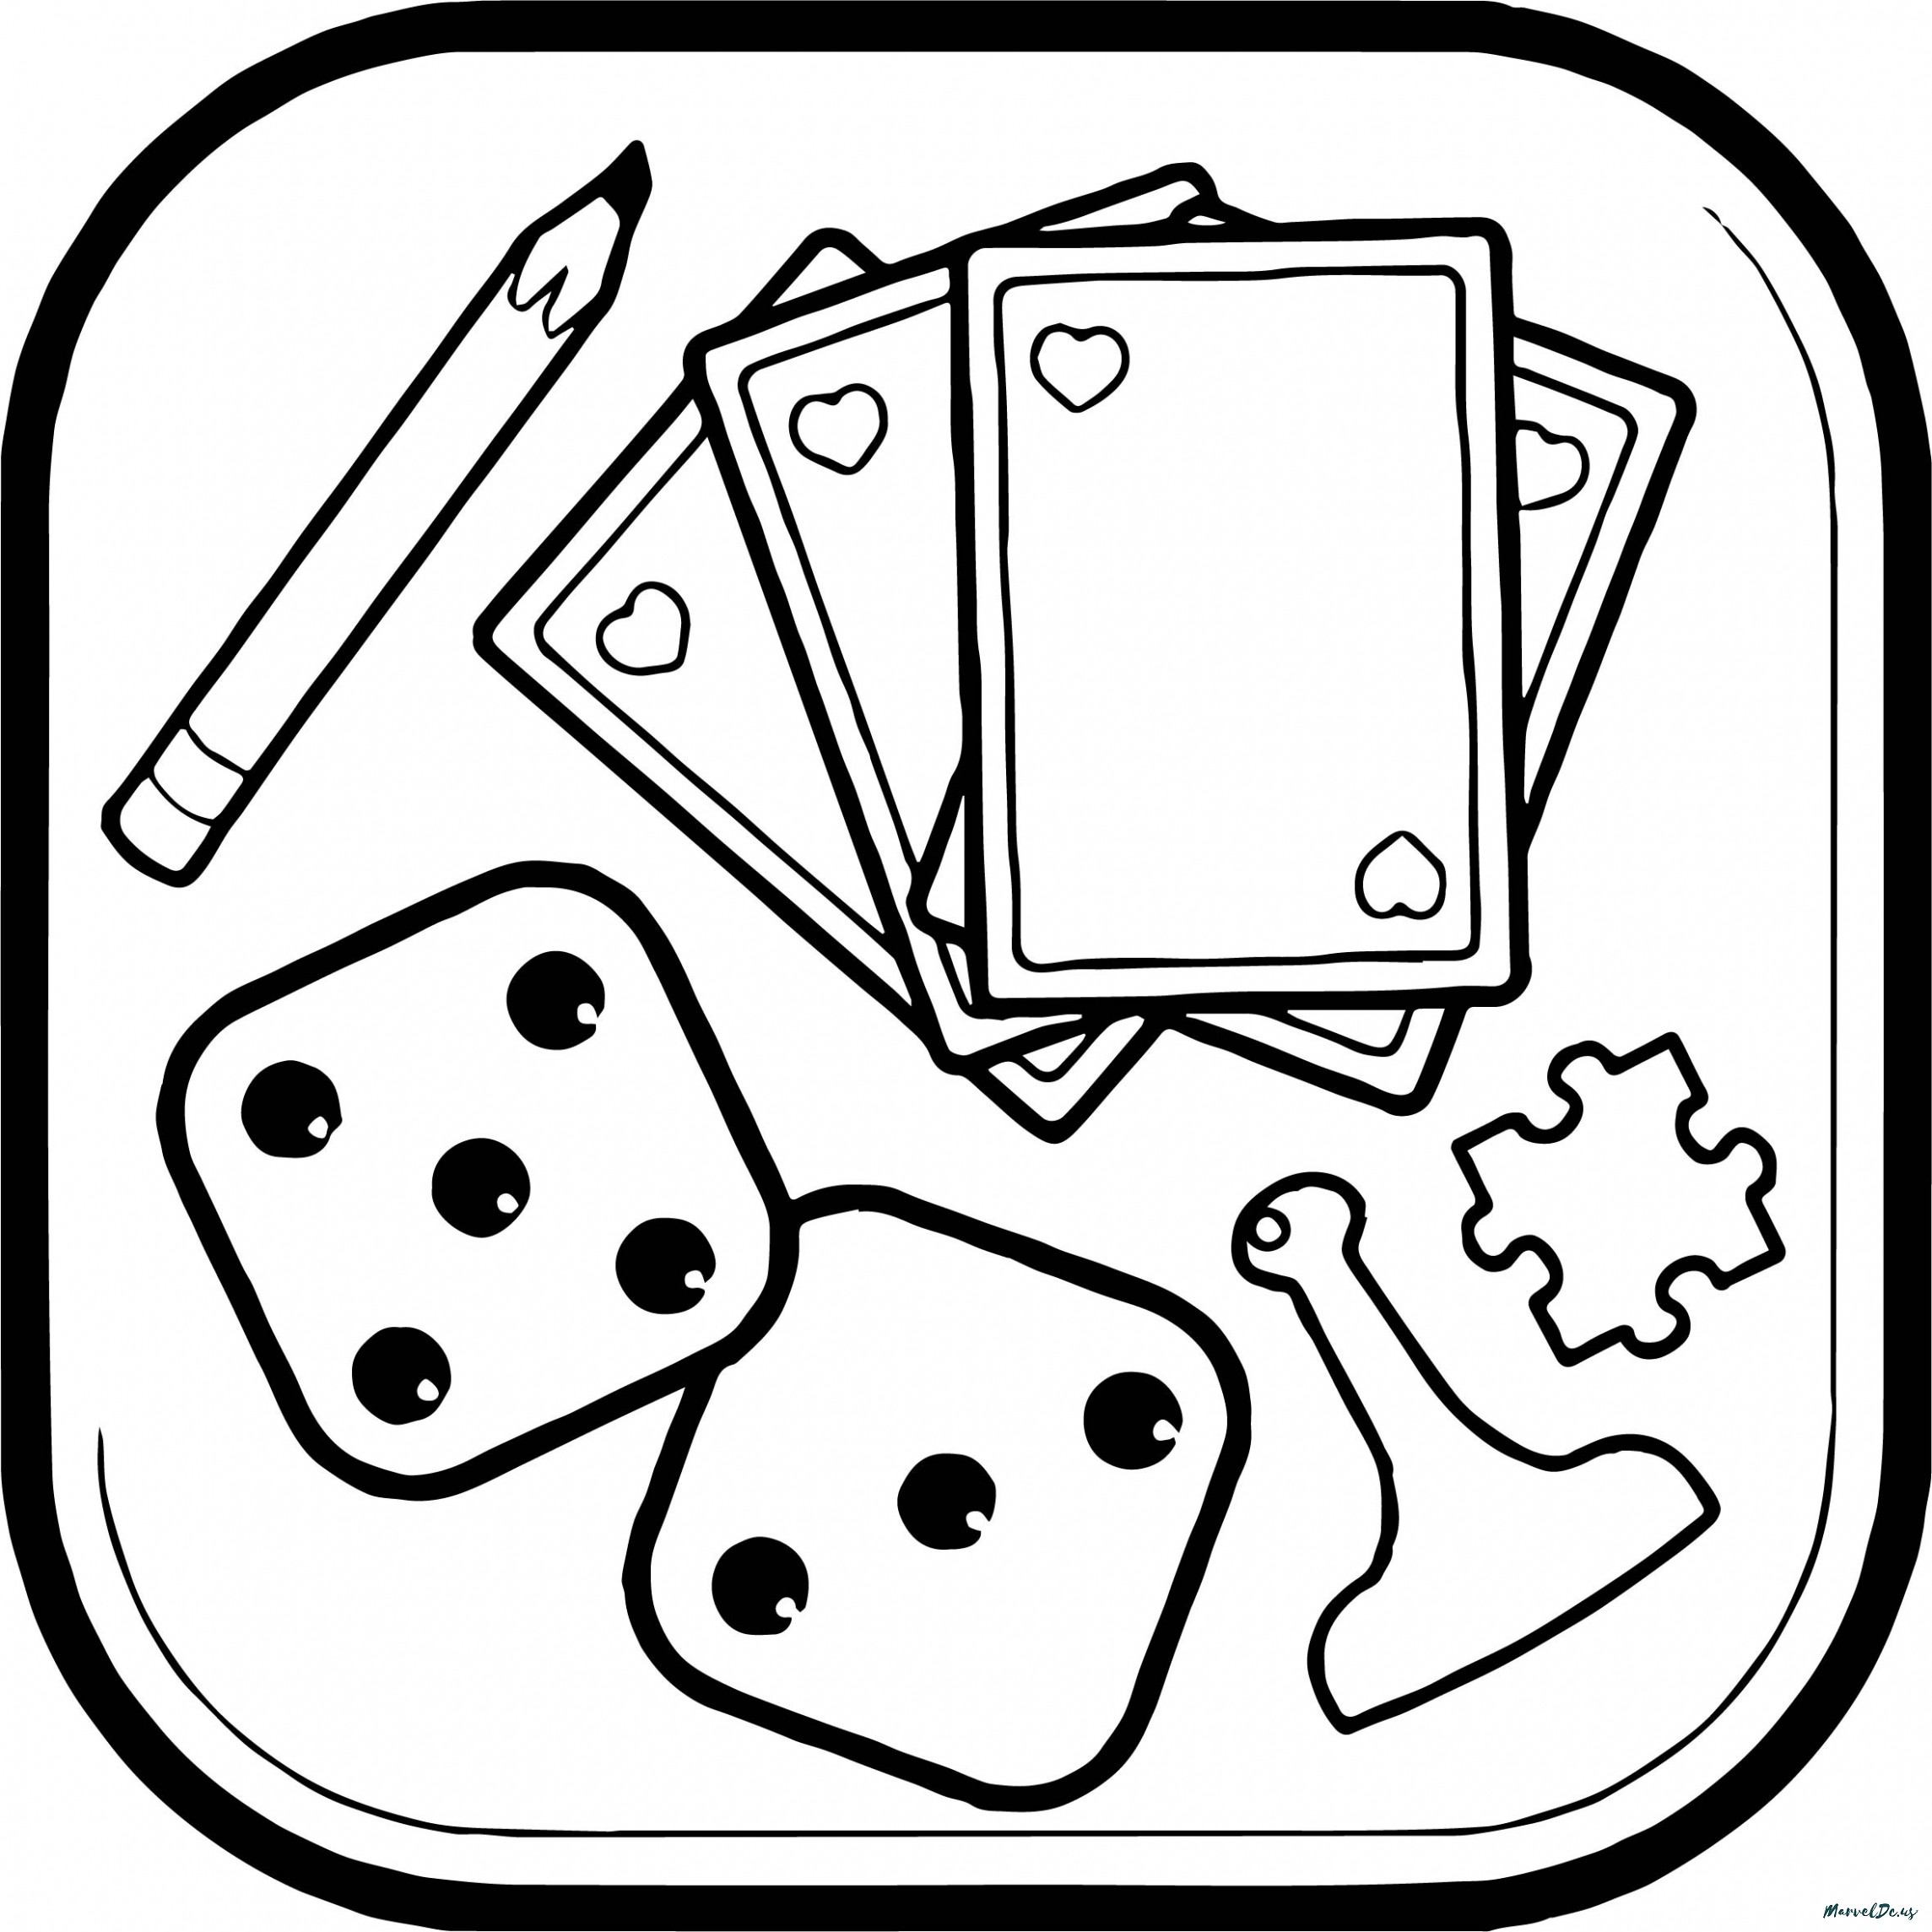 Coloring Games: Coloring Book & Painting instal the new version for android